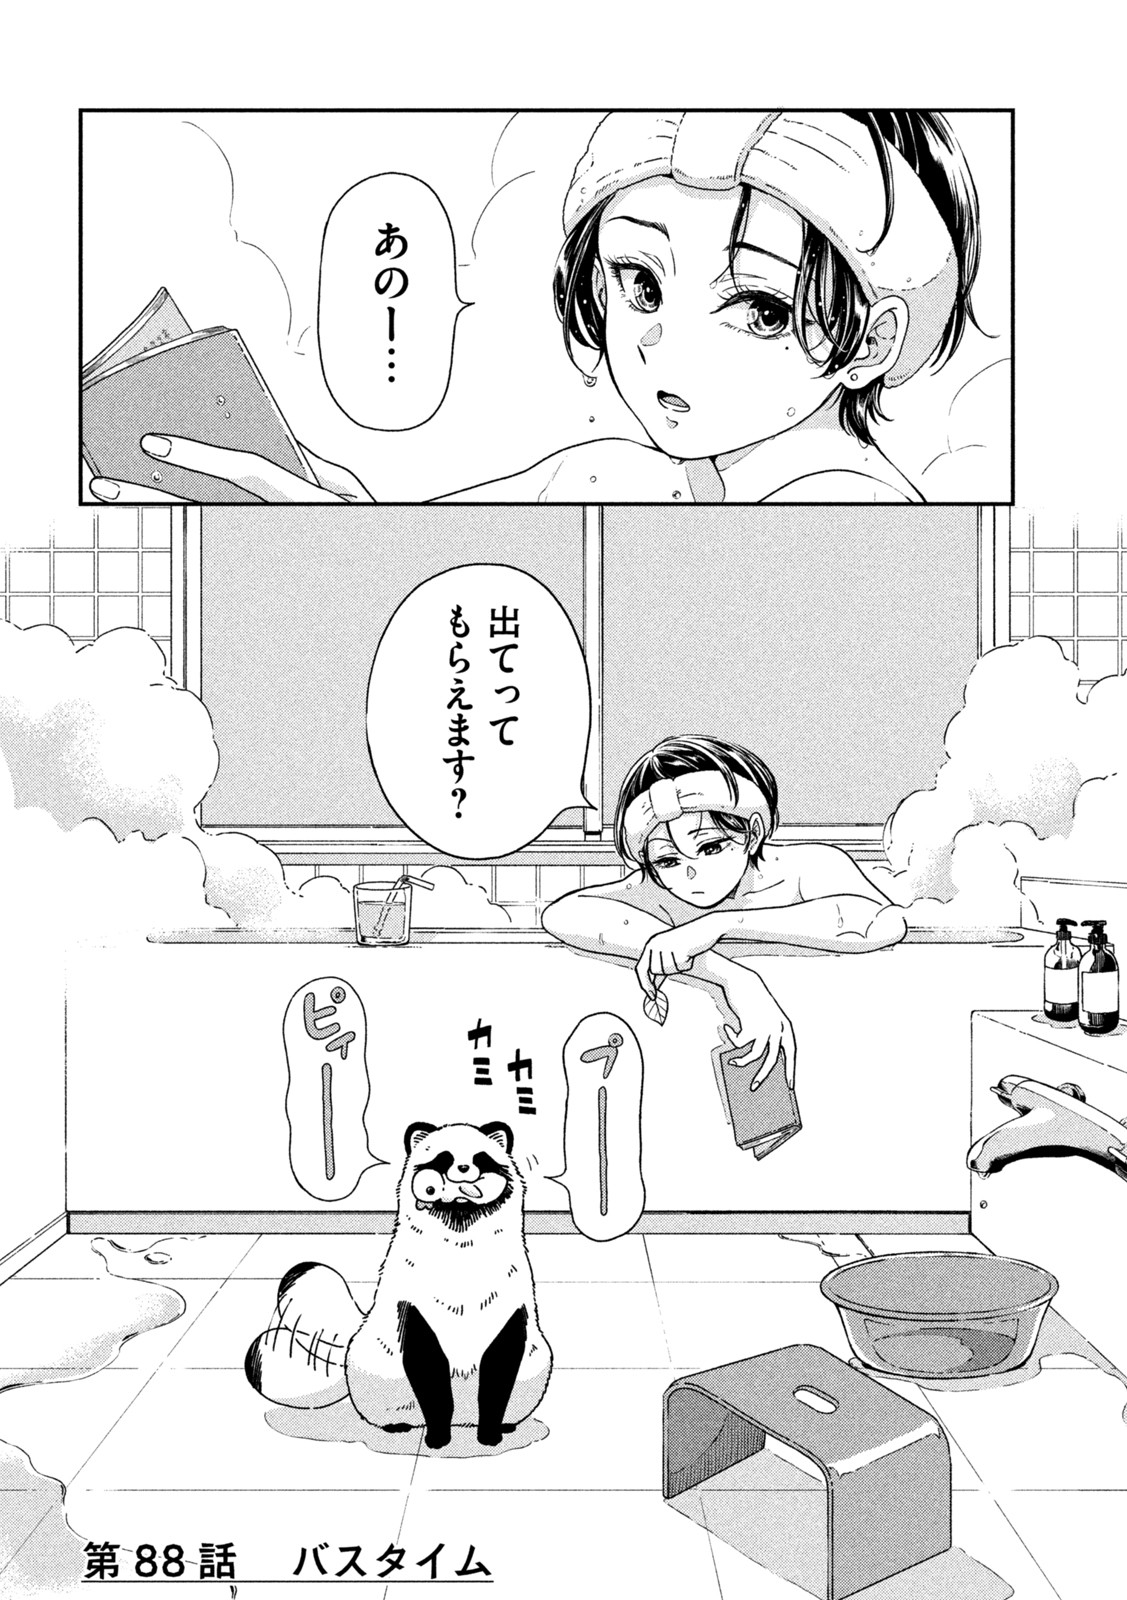 Ame to Kimi to - Chapter 88 - Page 4